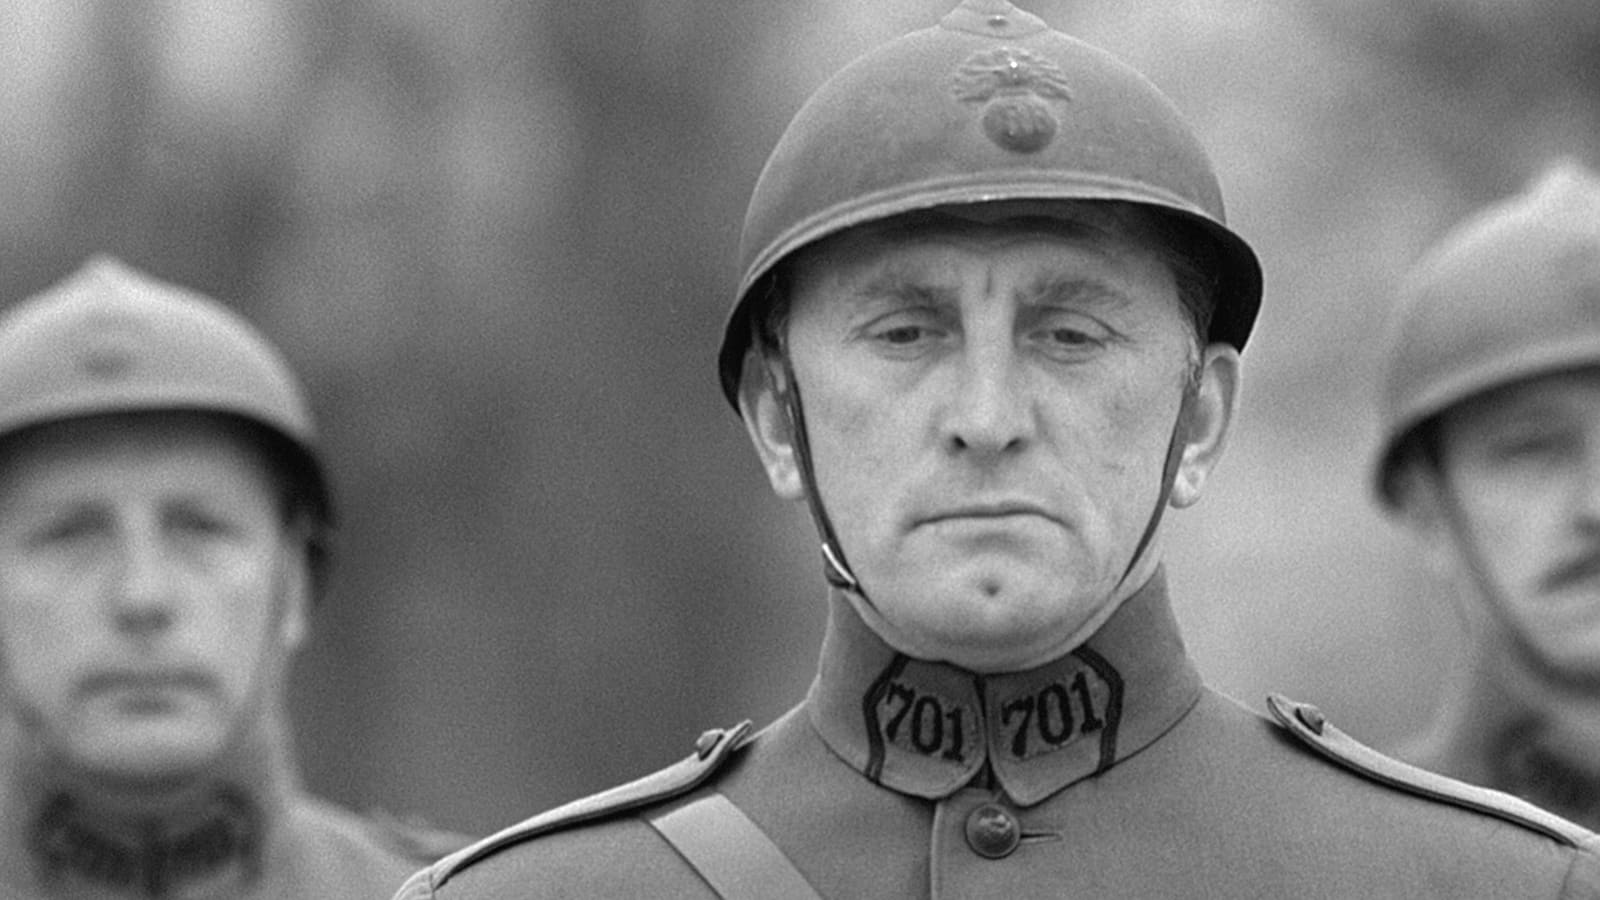 Paths of Glory (1957). The Criterion Collection